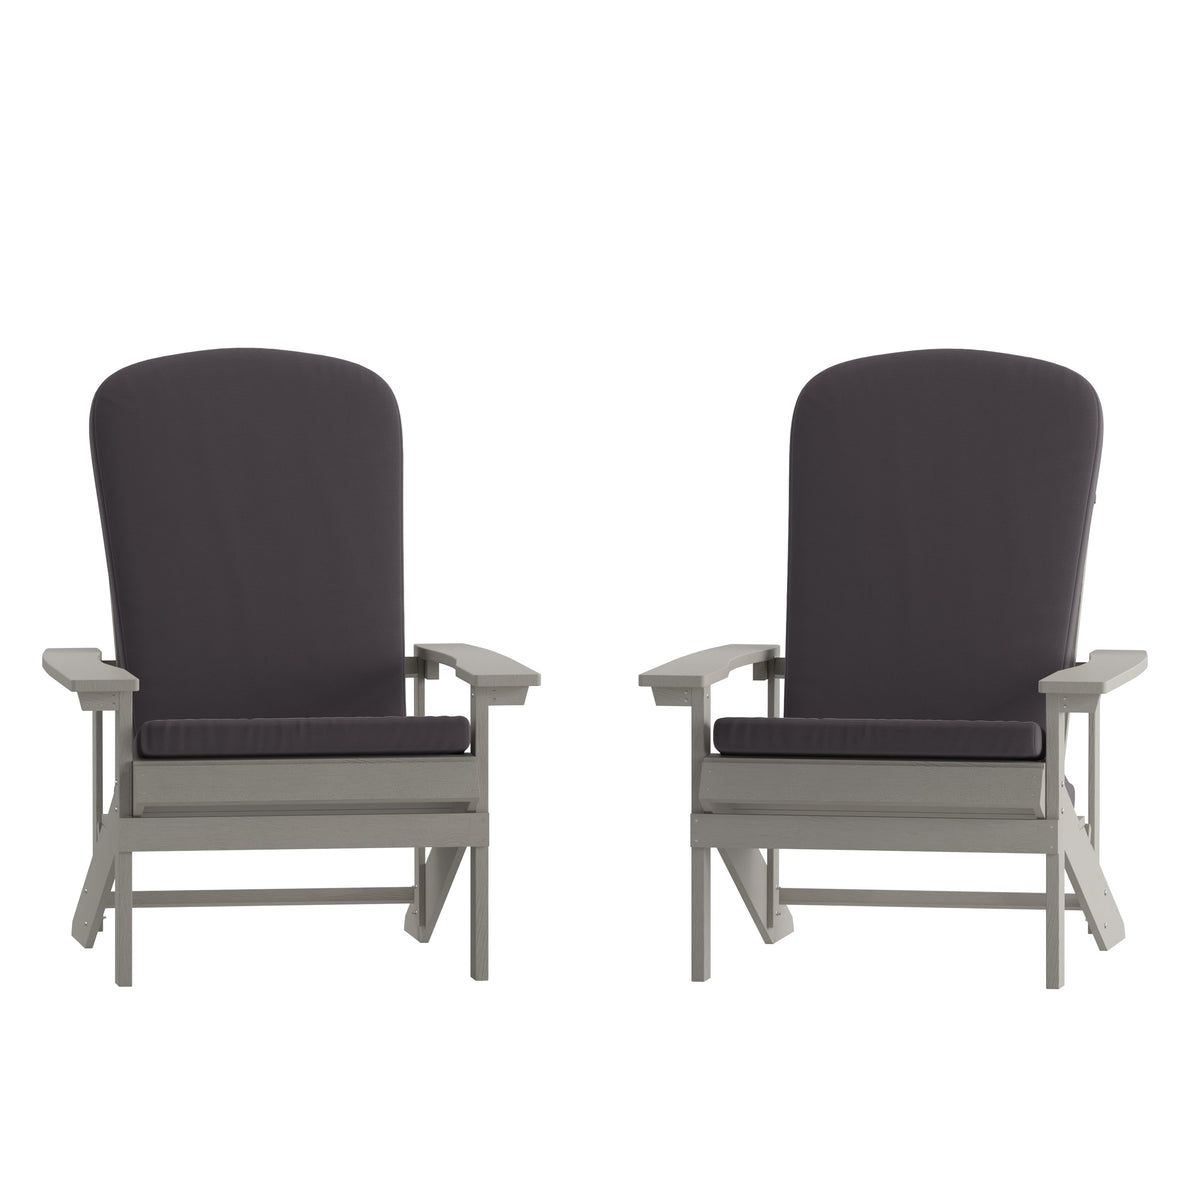 Gray |#| Indoor/Outdoor Light Gray Adirondack Chairs with Gray Cushions - Set of 2